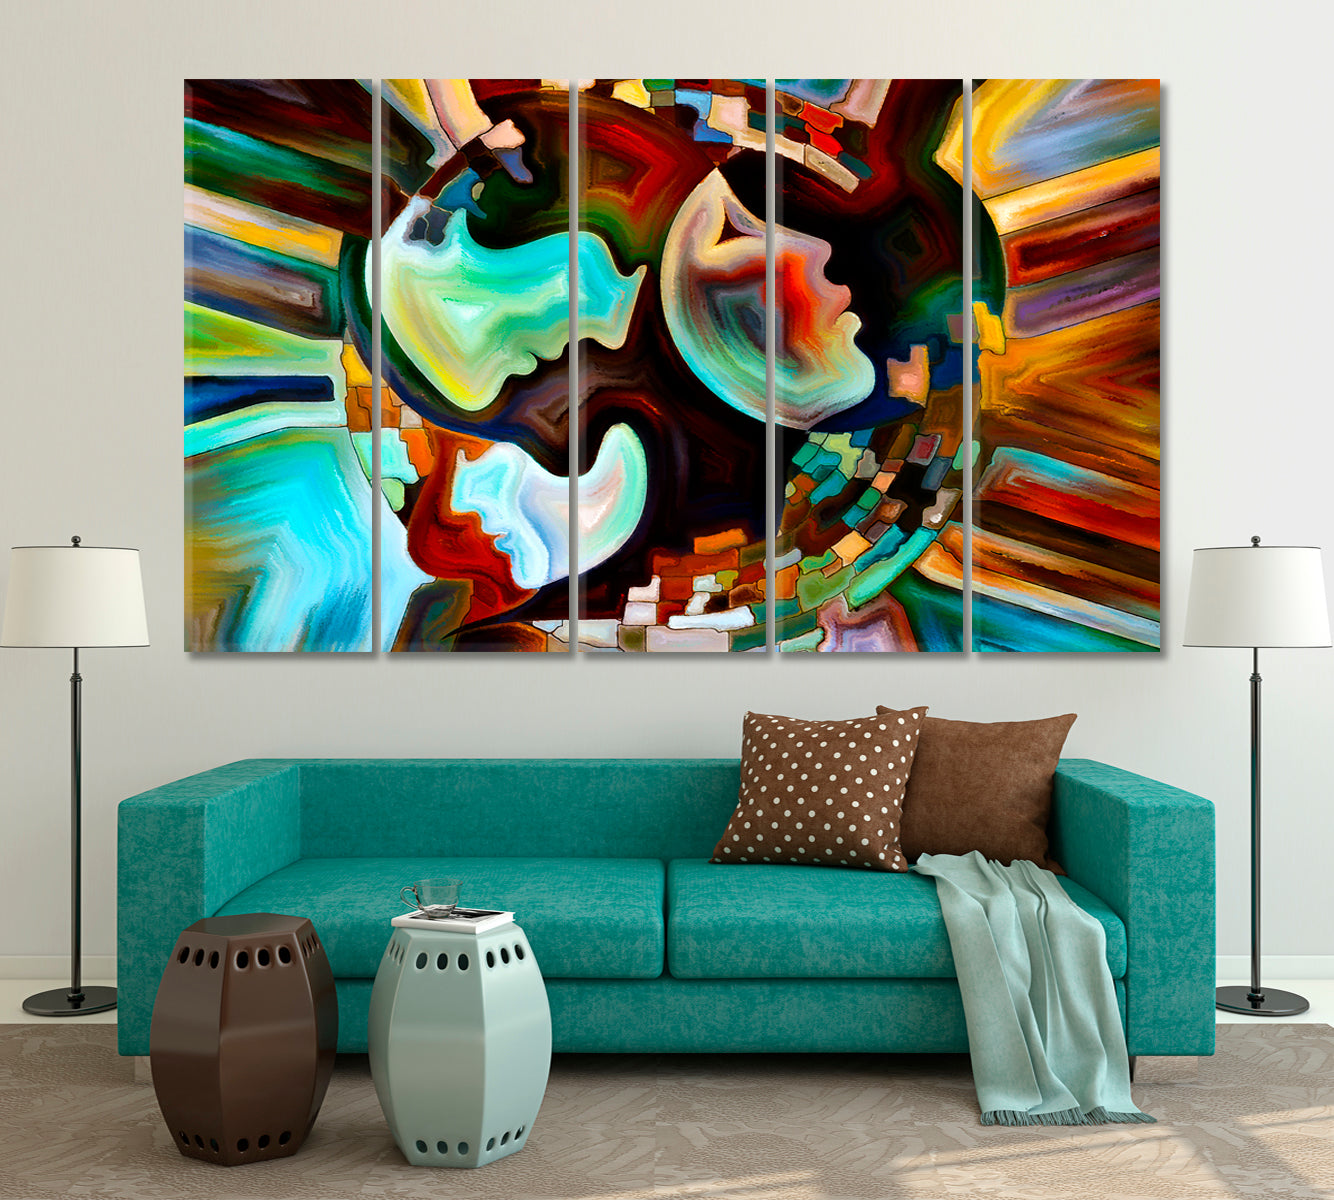 Abstract Design Human And Nature Contemporary Art Artesty 5 panels 36" x 24" 